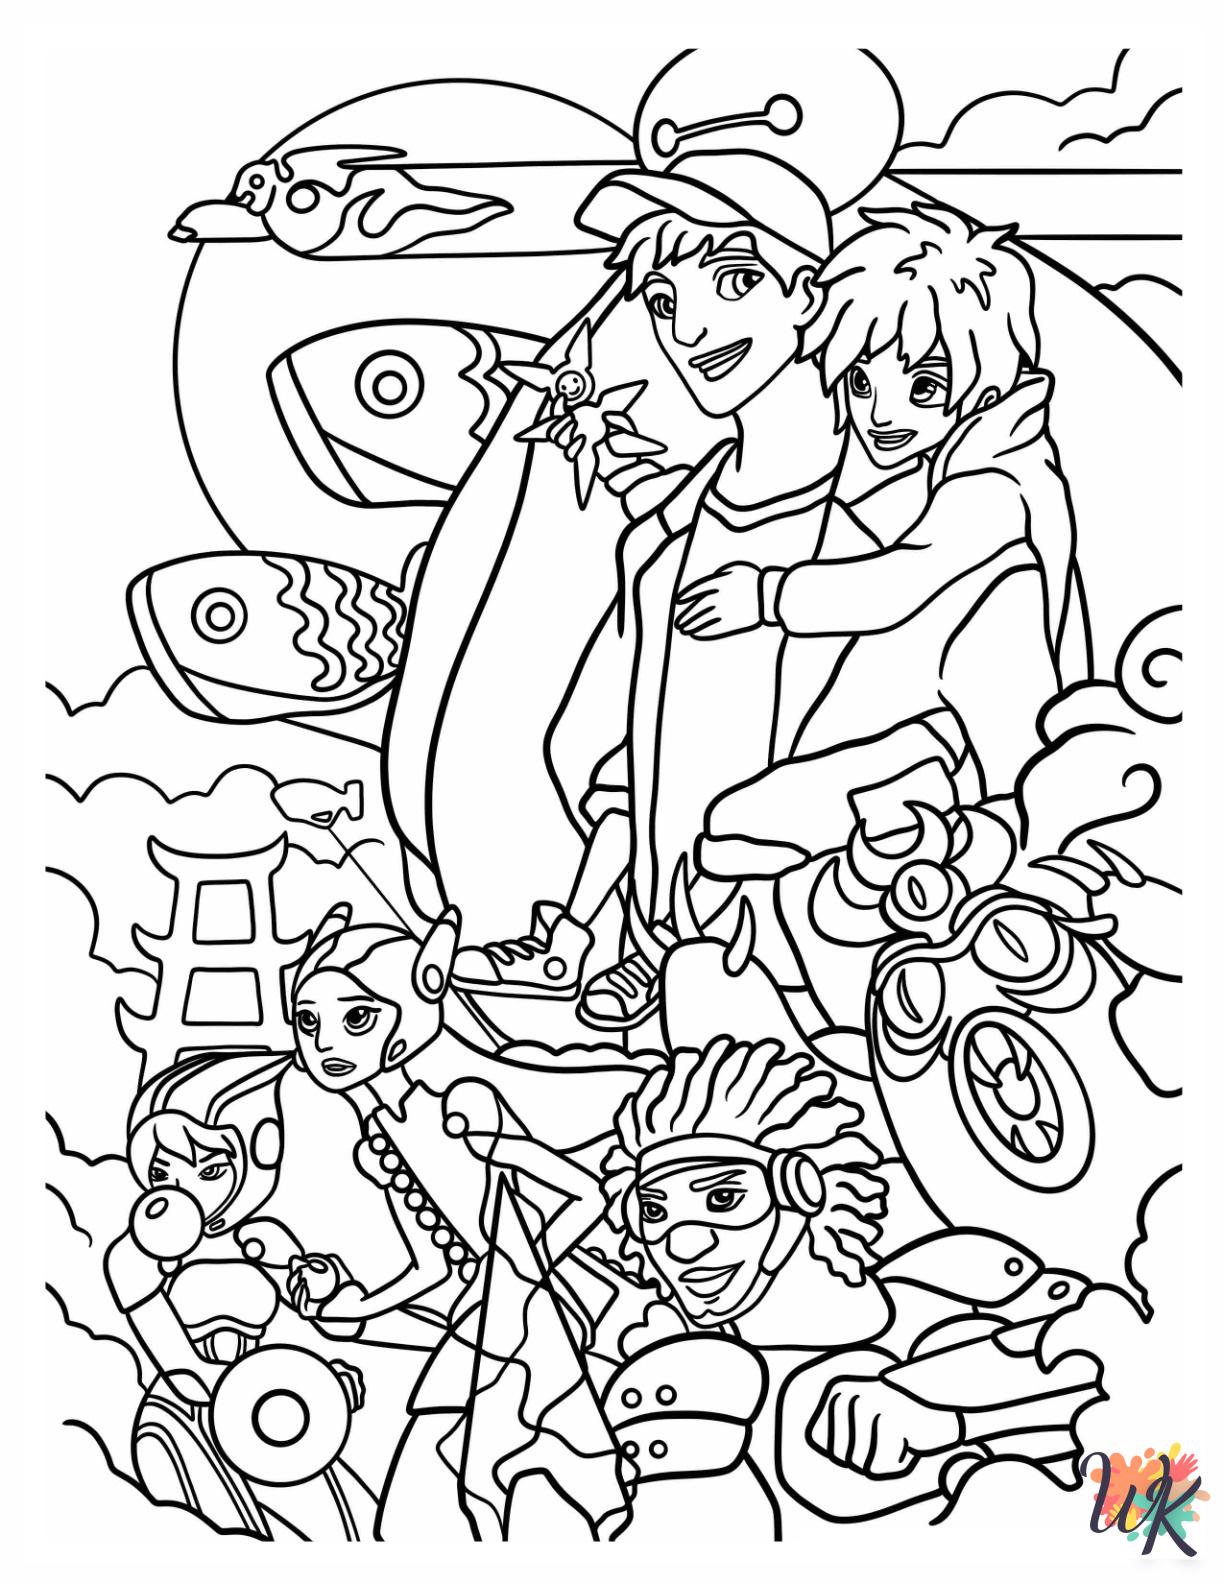 Big Hero 6 Coloring Pages 15